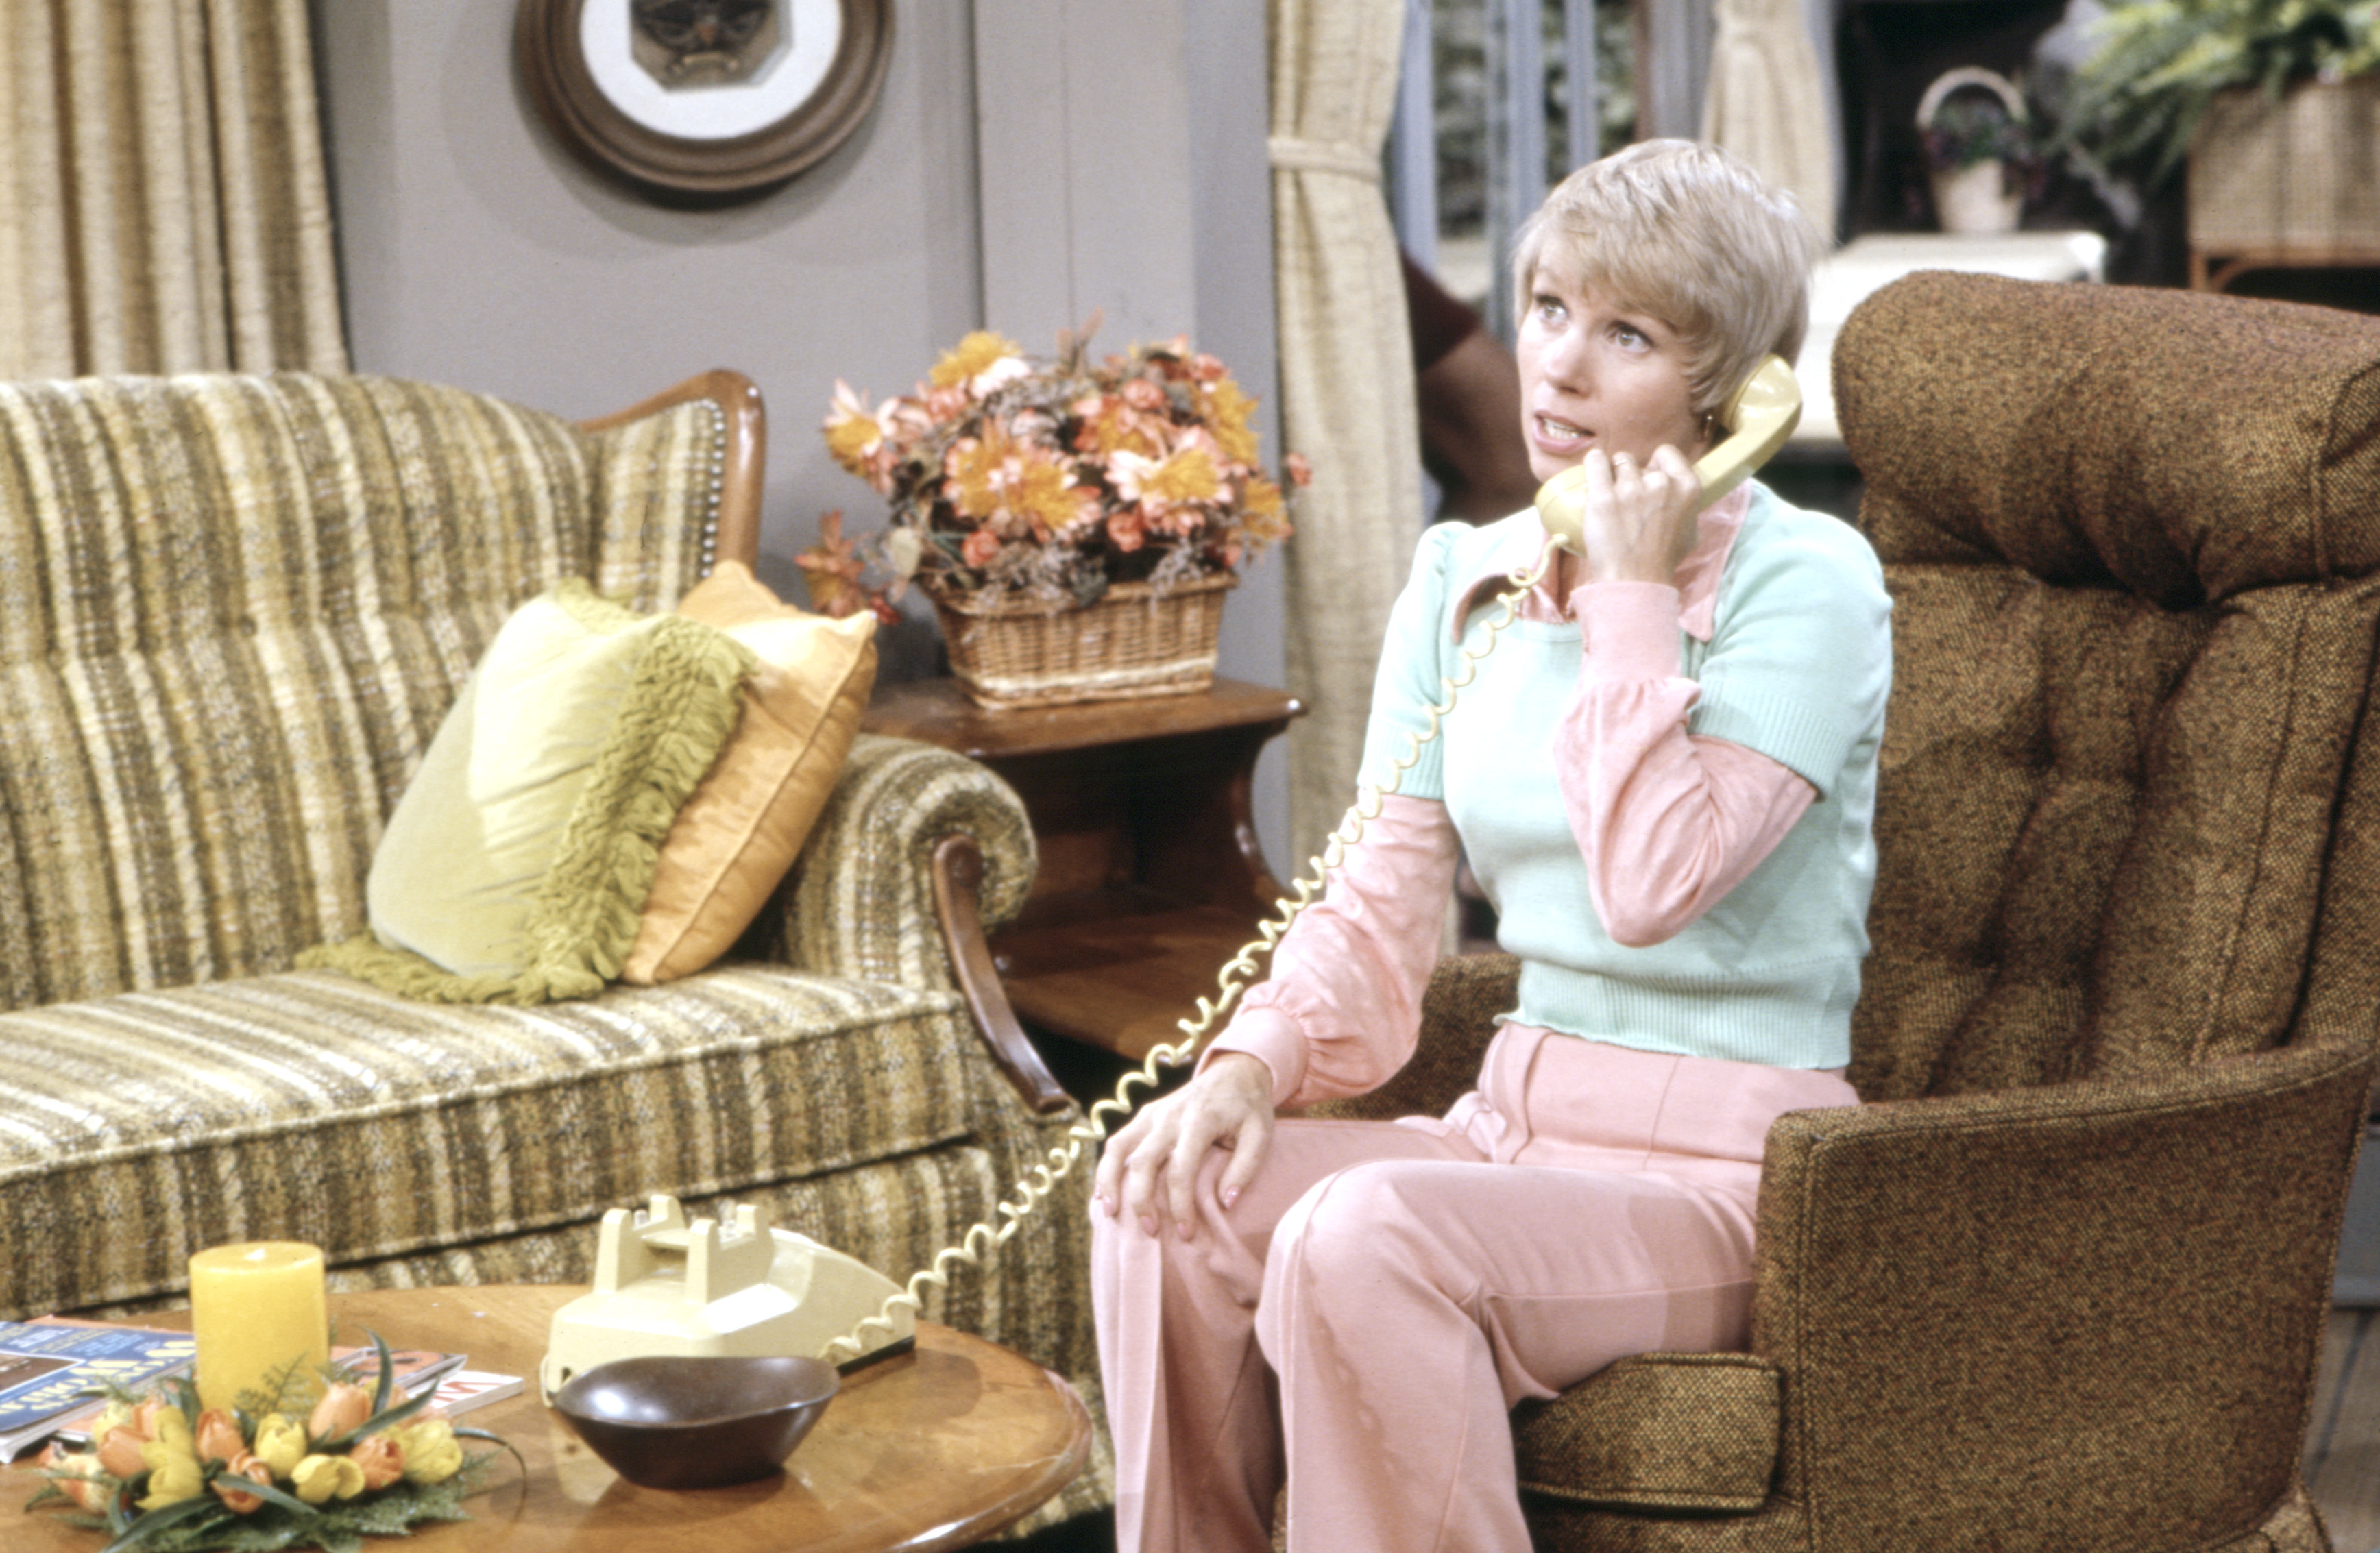 Joyce Bulifant appearing in an episode of "Love Thy Neighbor" circa 1973 | Source: Getty Images